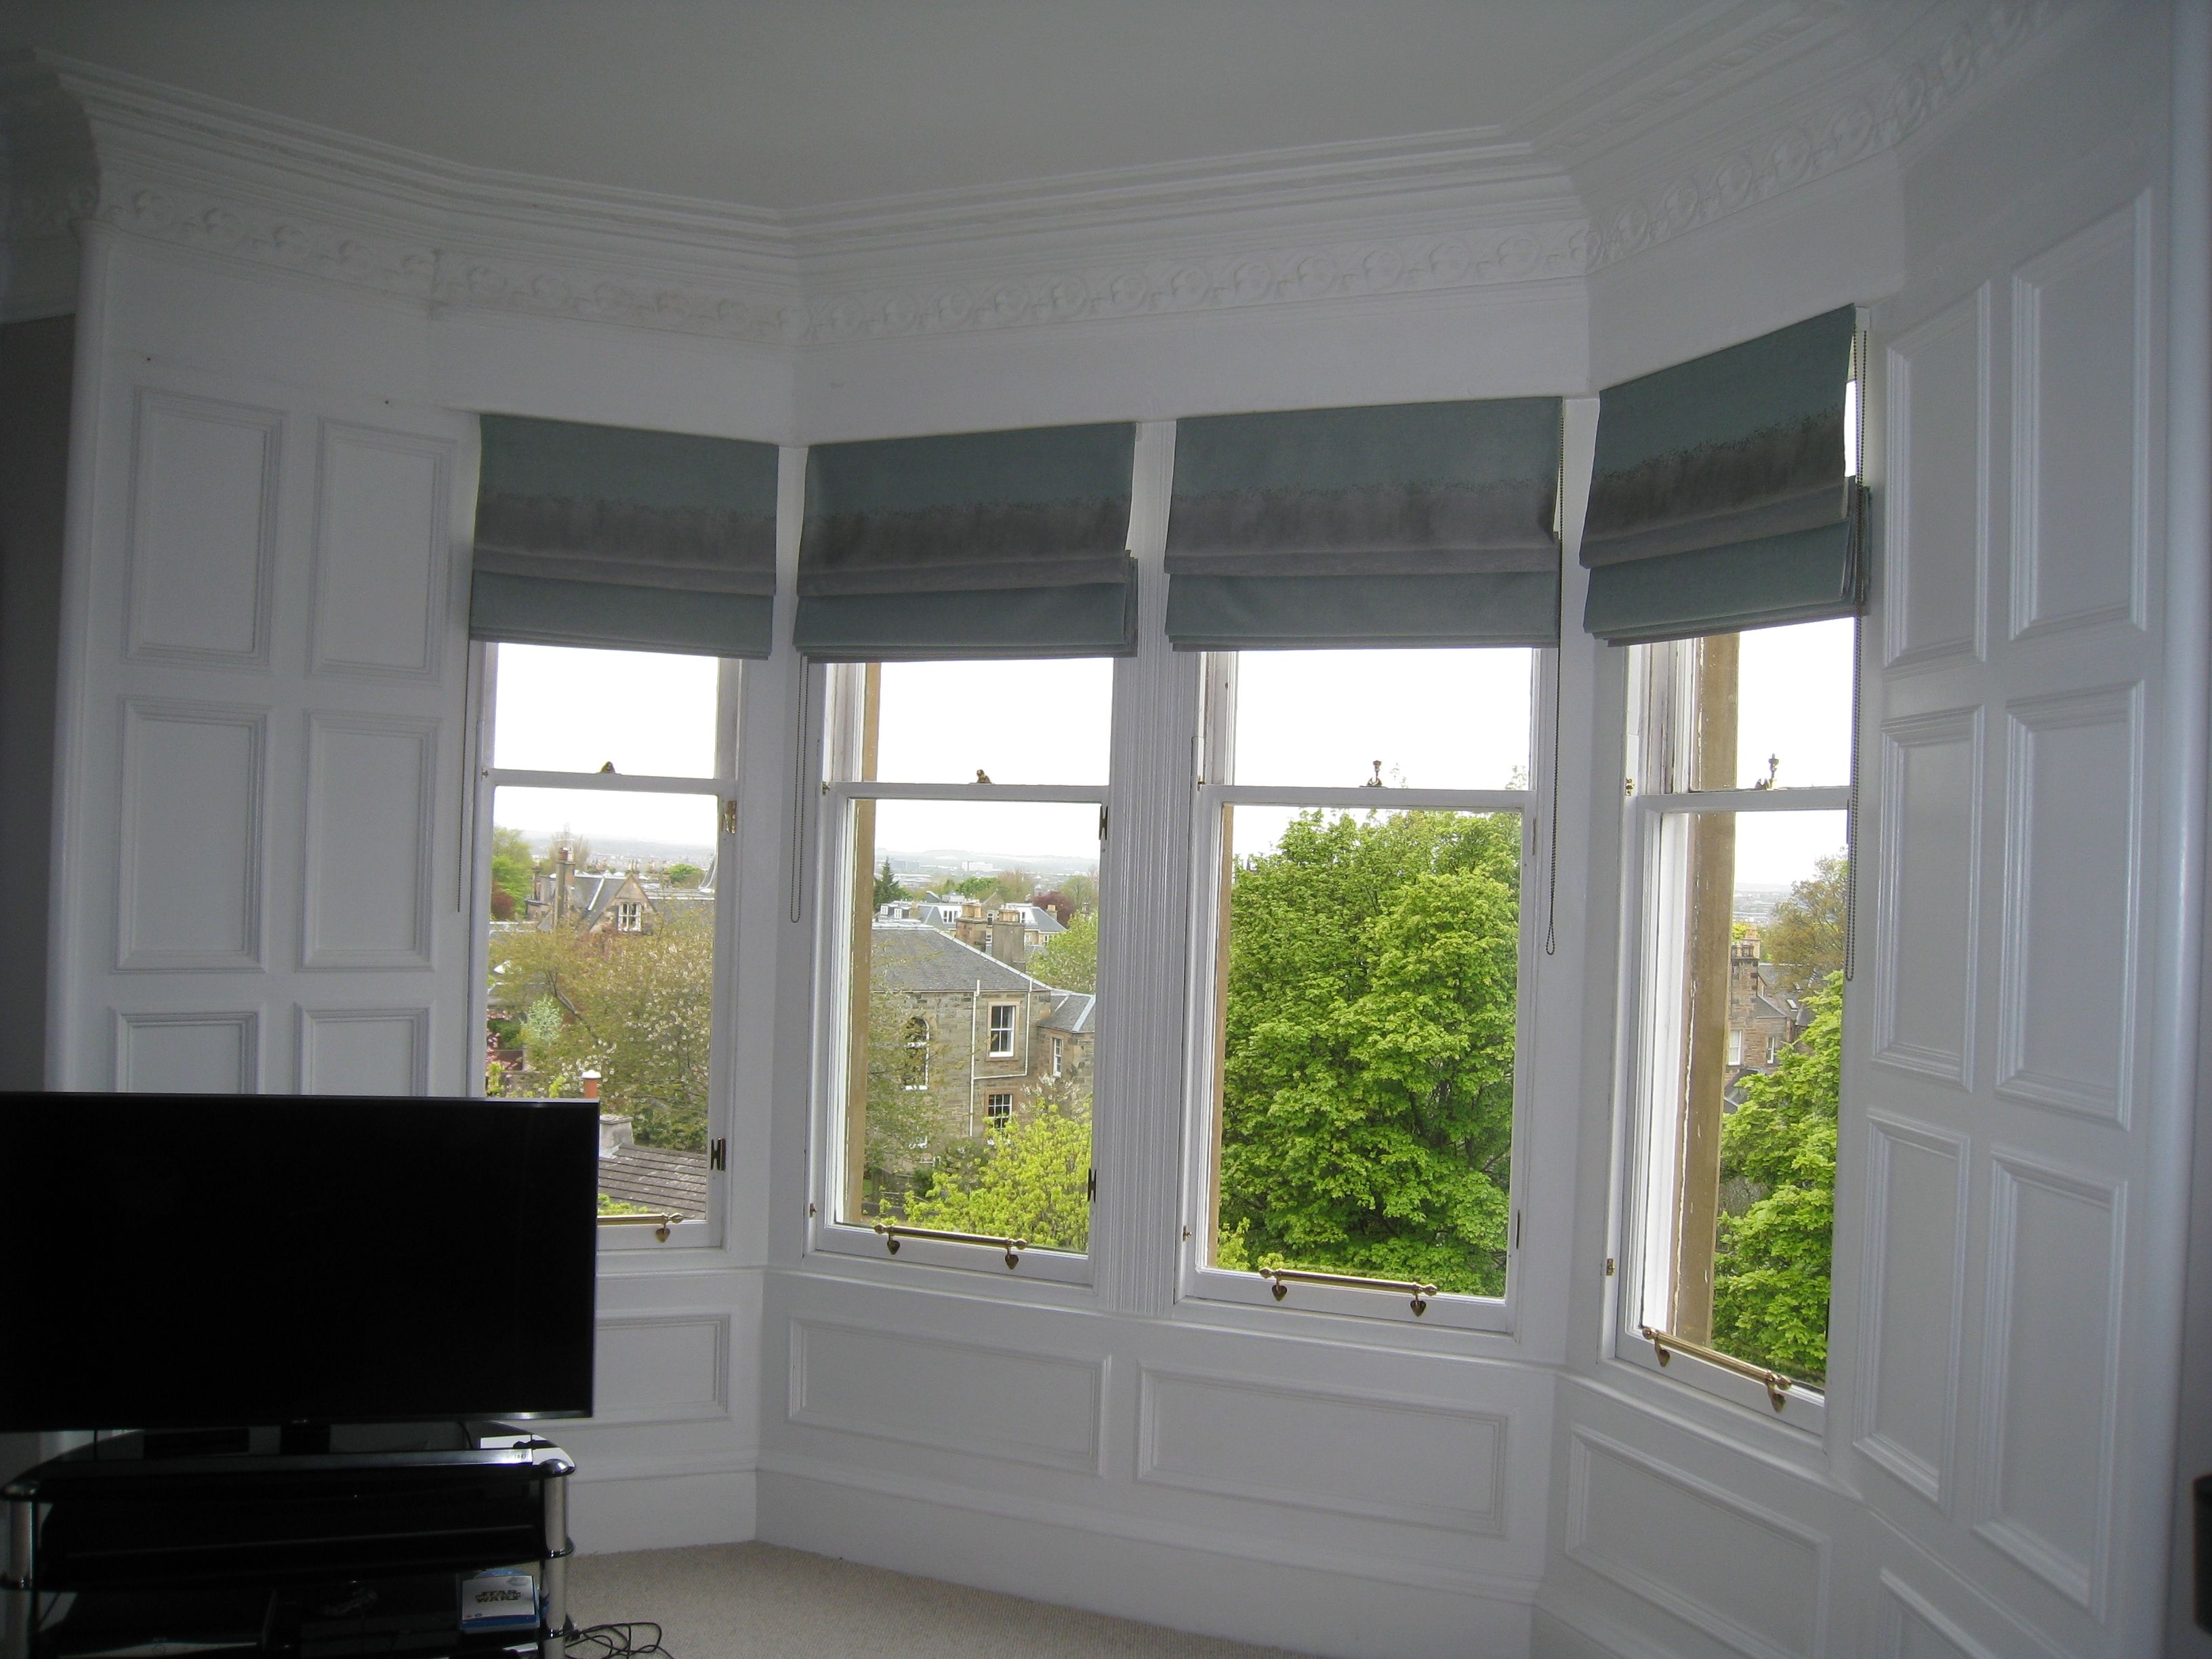 Roman Blinds For Bay Windows Ines Interiors Pertaining To Roman Blinds On Bay Windows (View 11 of 15)